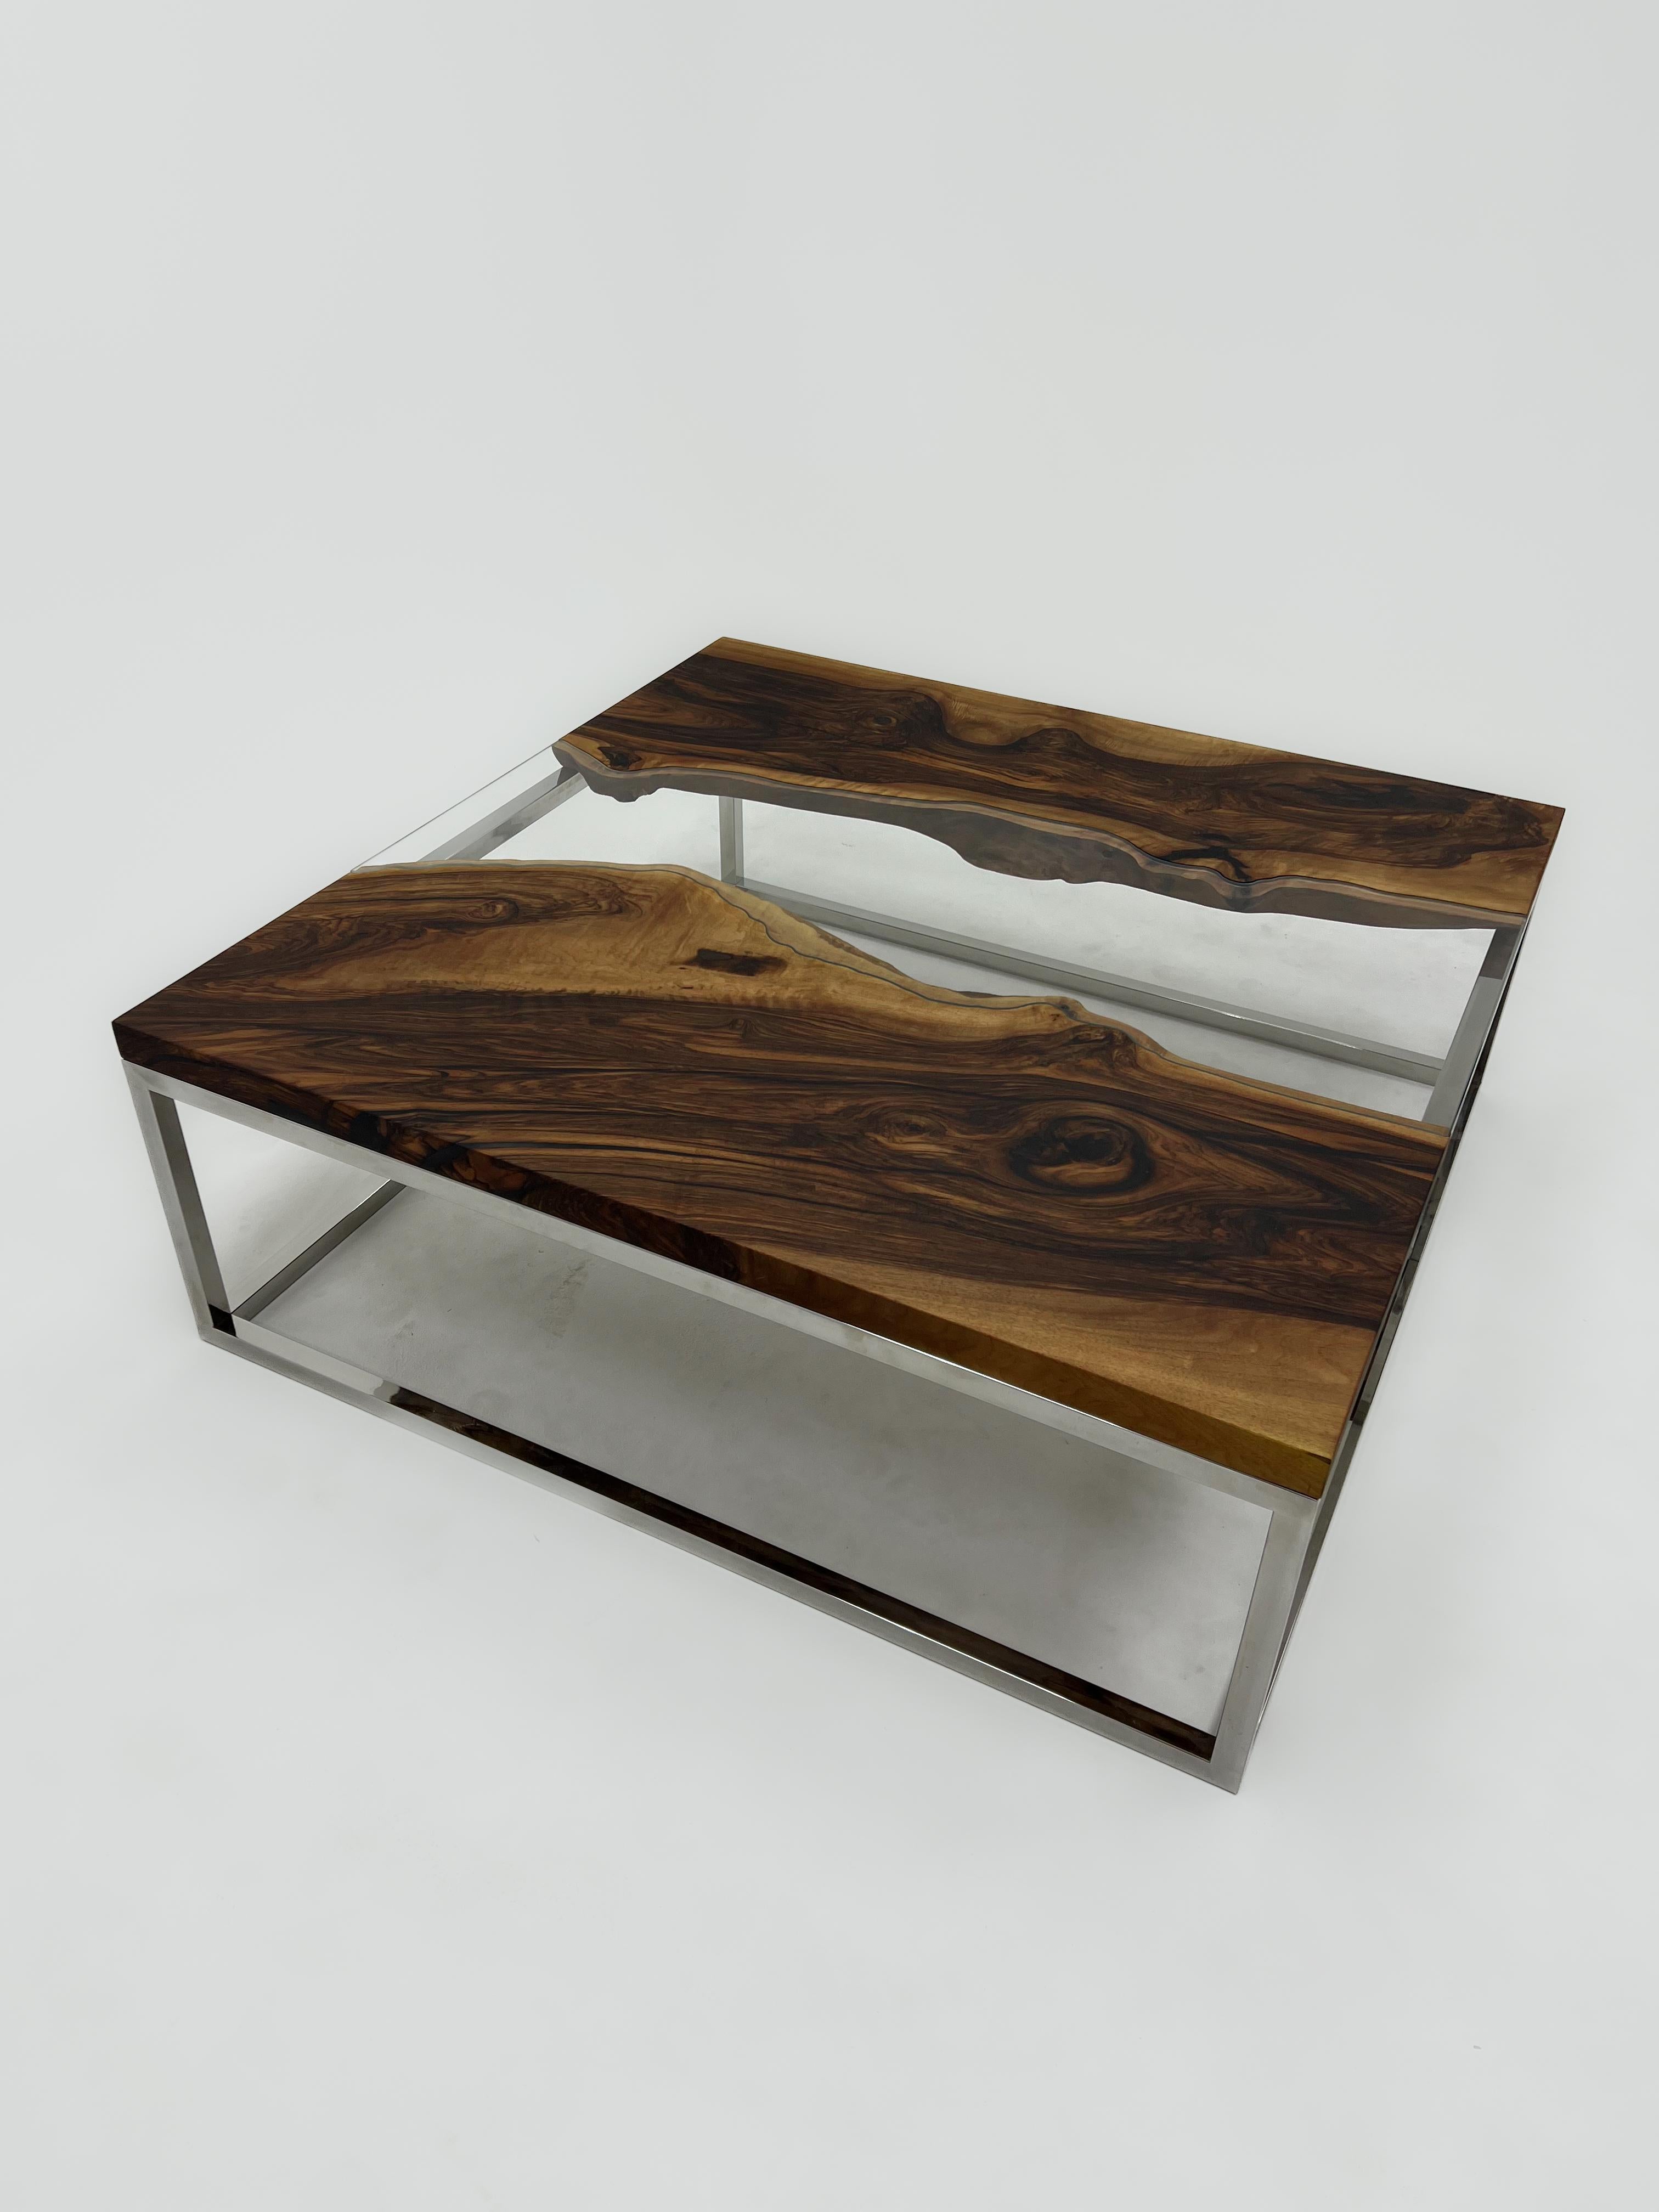 Walnut Glass River Coffee Table

This coffee table is made walnut wood. The glass is cut according to the curves of the wood and brought together in a unique combination.

Custom sizes, colours and finishes are available!